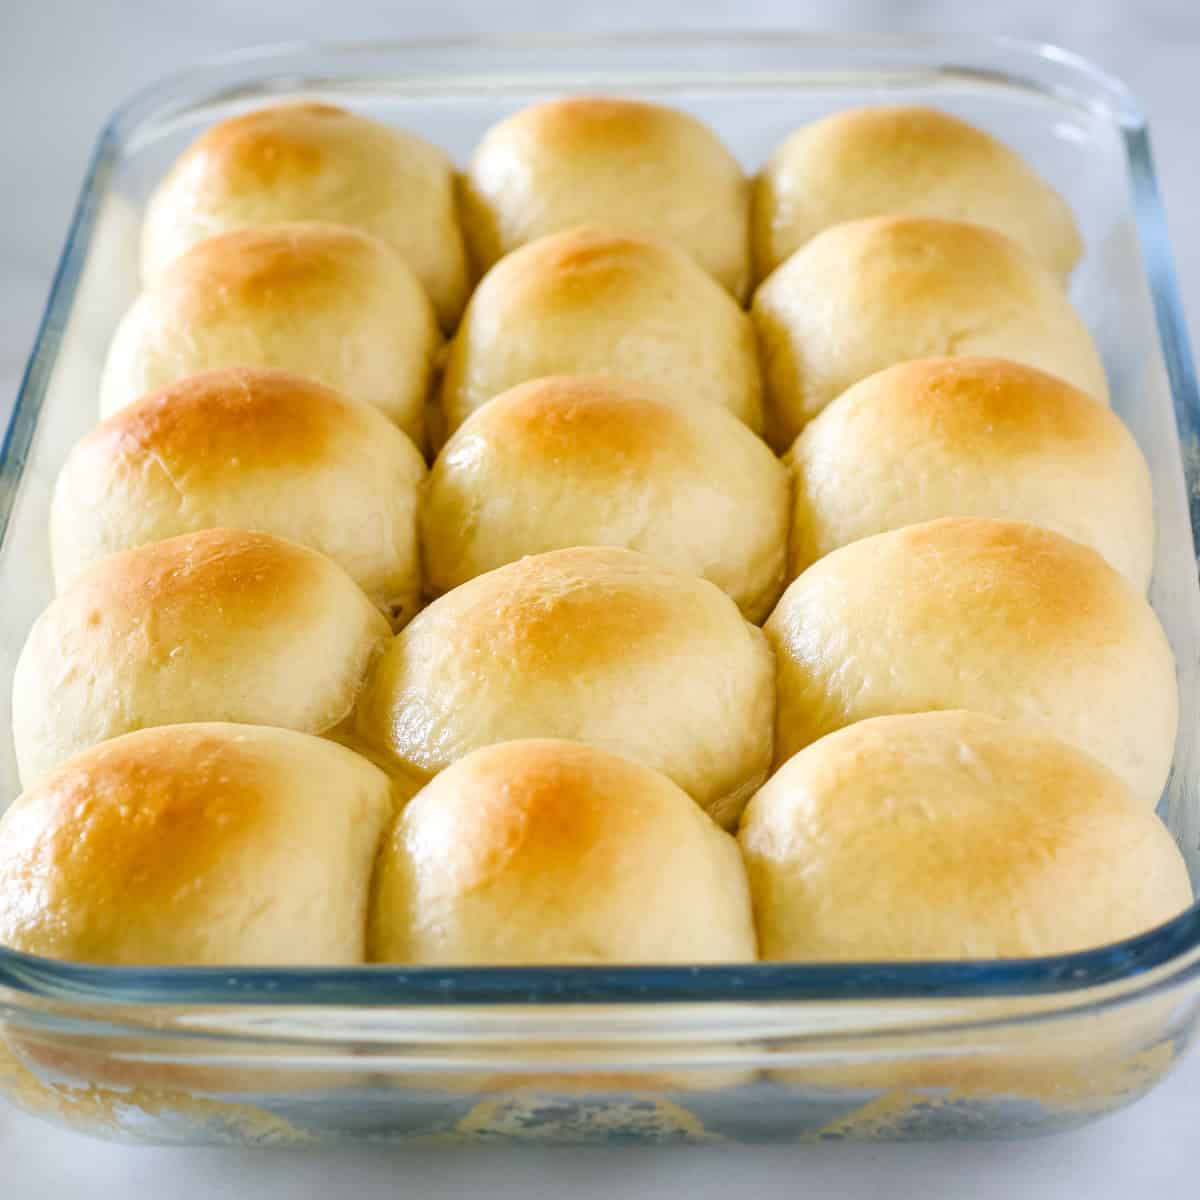 Homemade bread rolls in a glass baking dish.